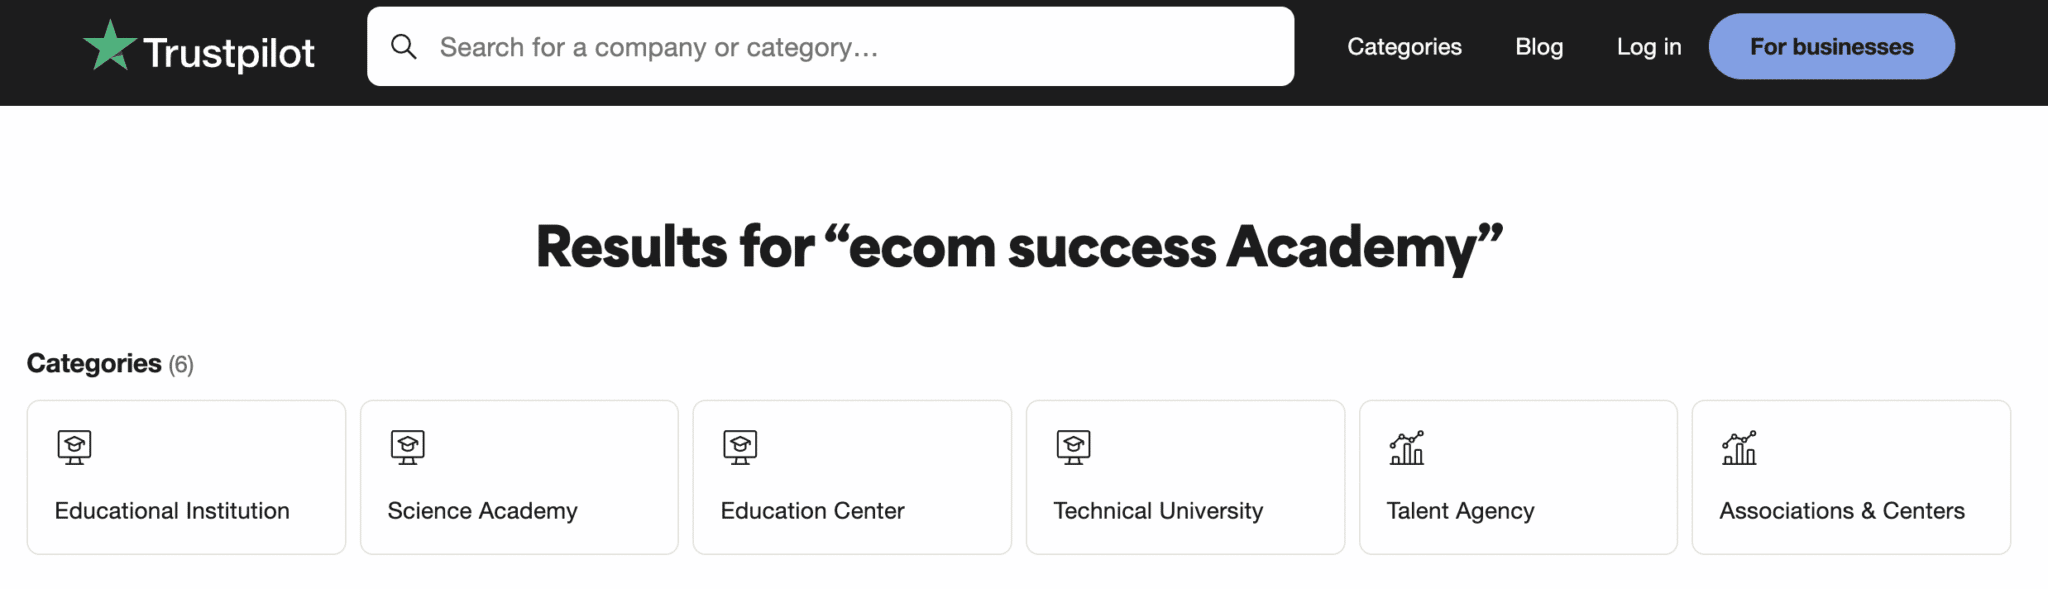 Search result of eCom Success Academy on Trustpilot